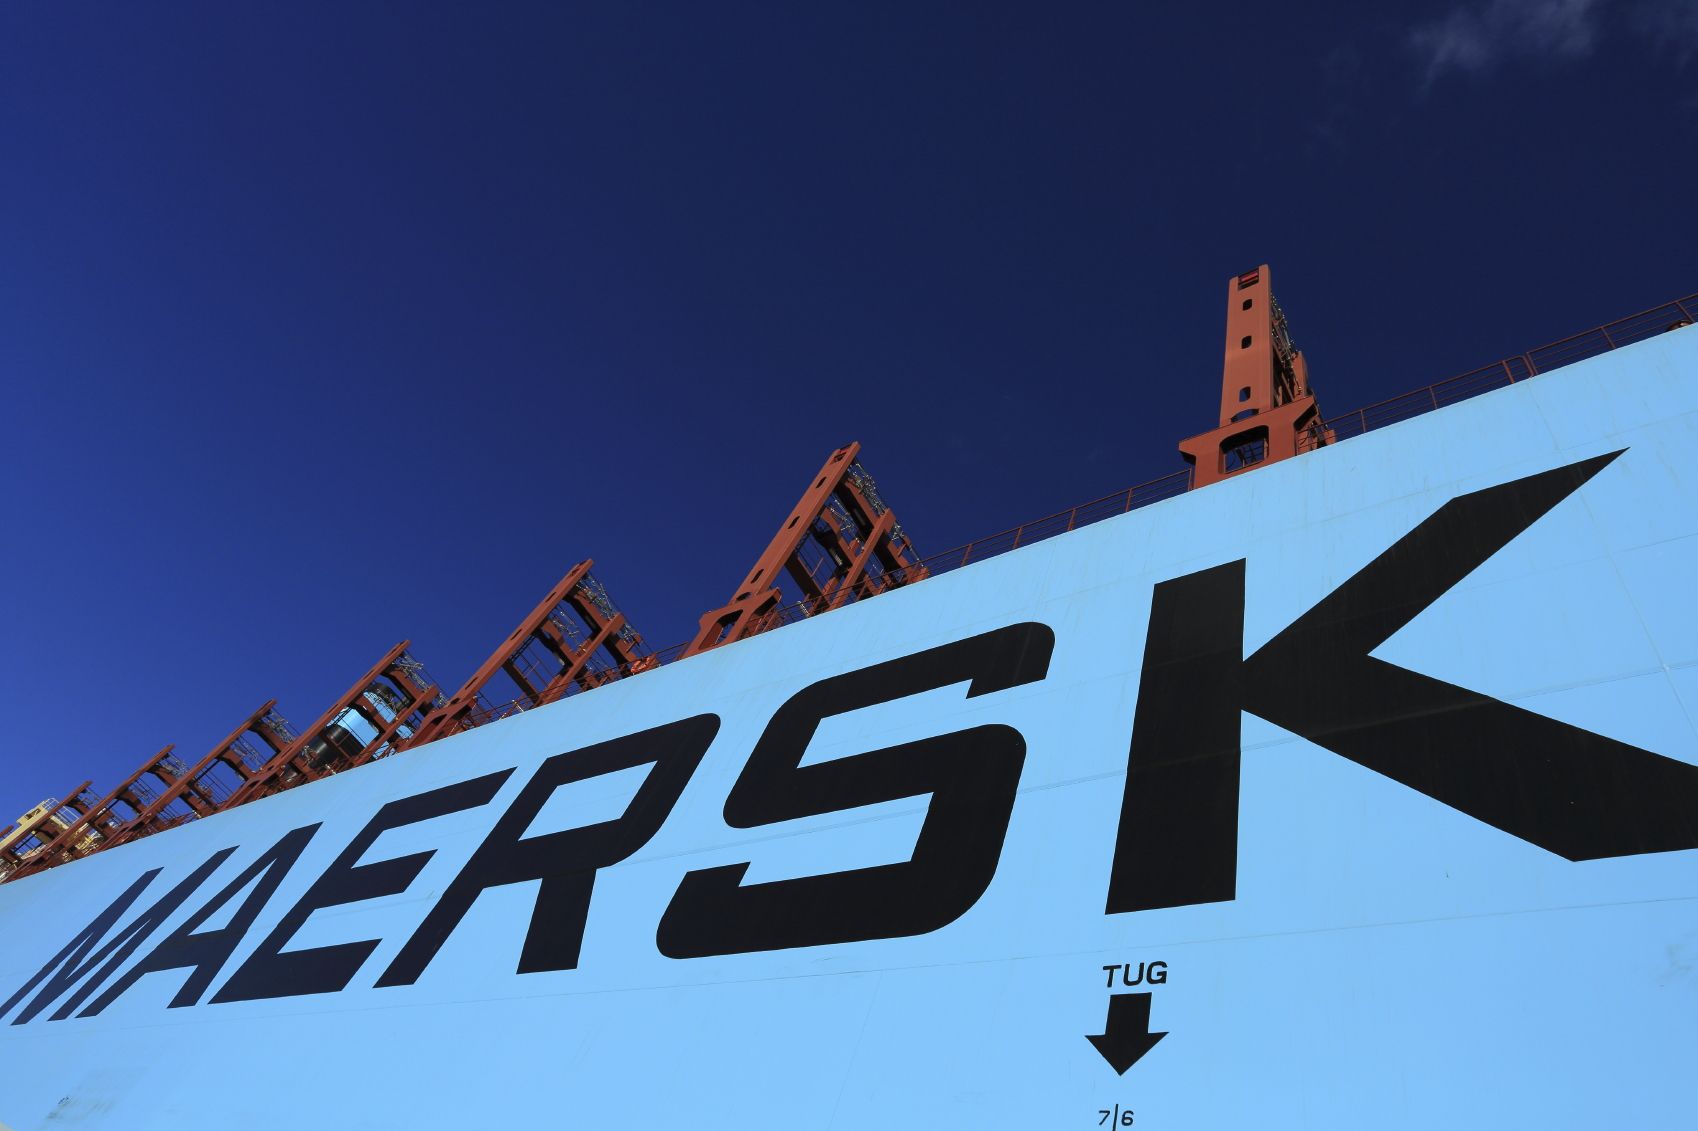 Today’s Date: Birth of Maersk